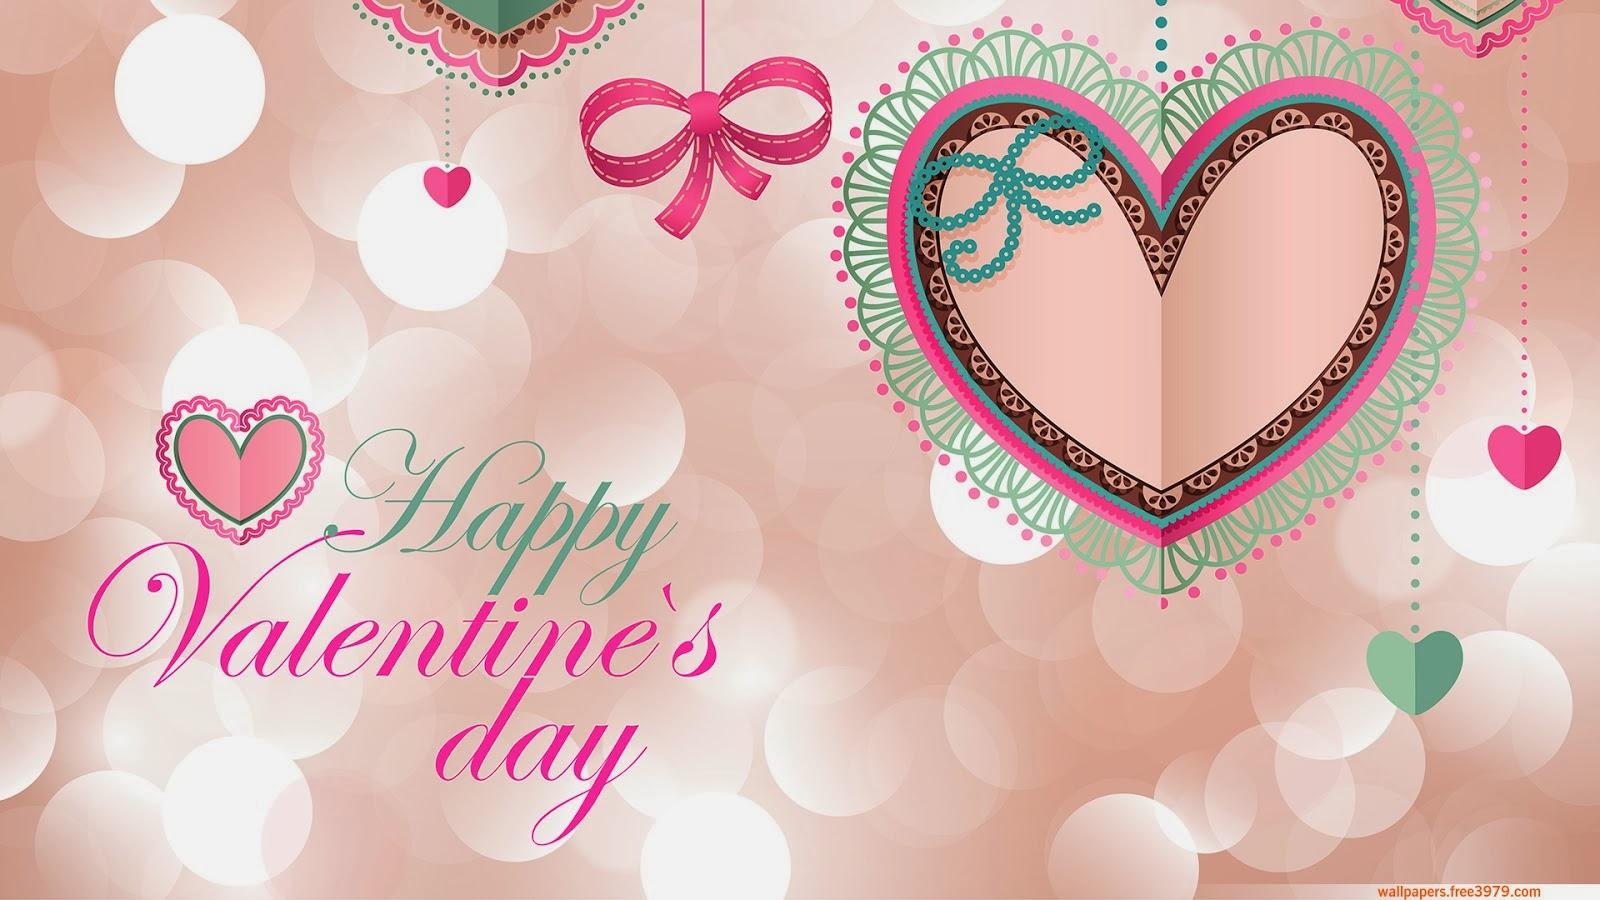 Free download 25 Romantic Valentines Day Wallpaper